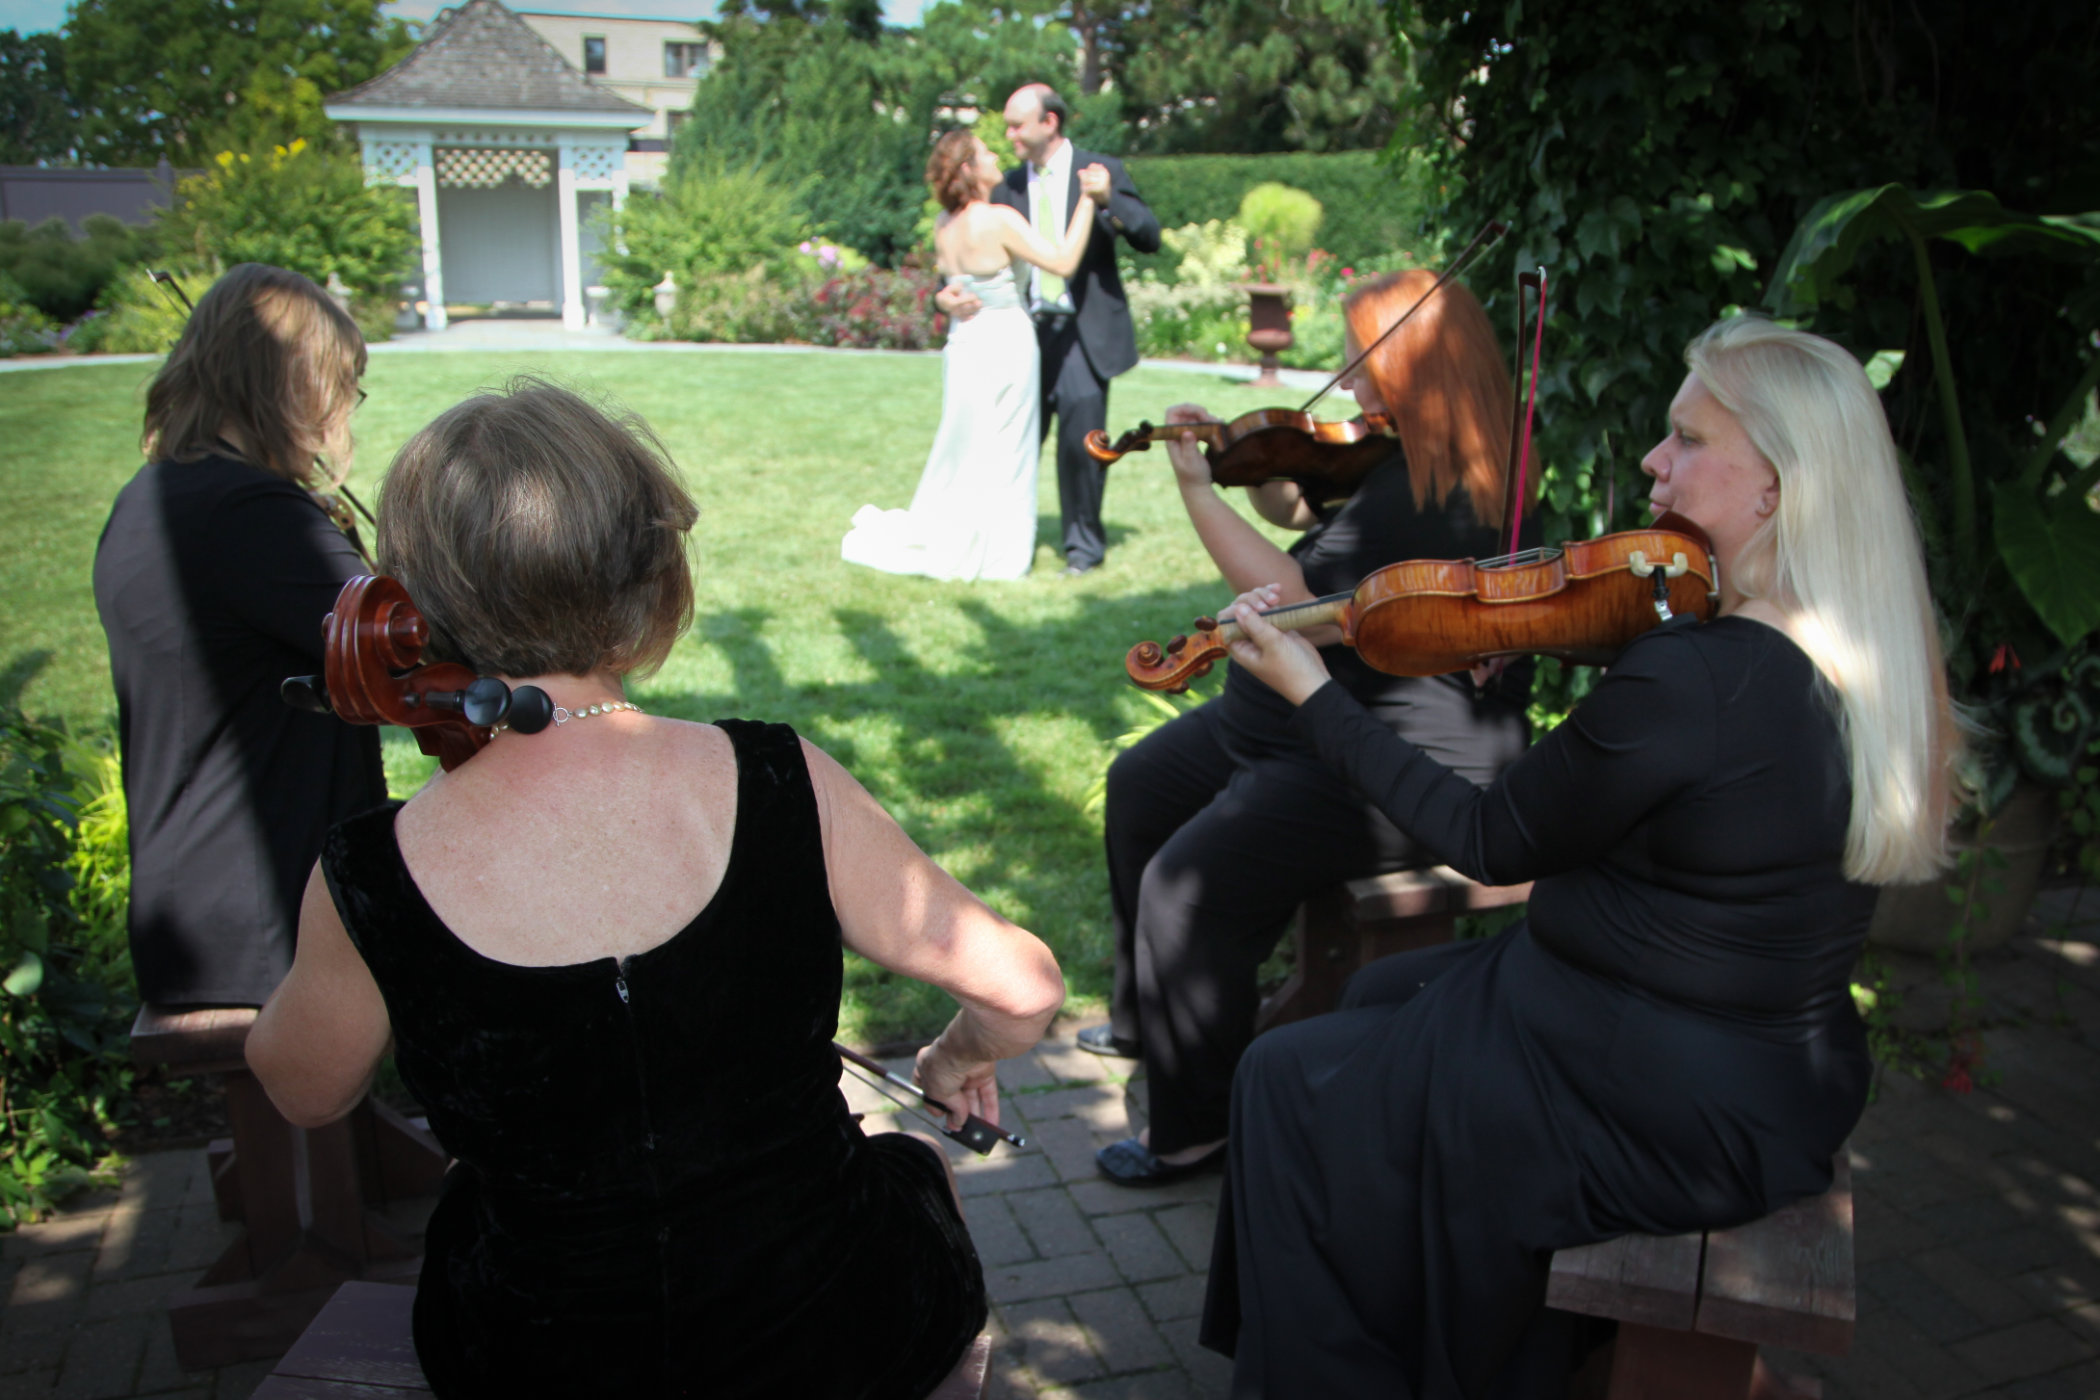 Award-winning Quartessence Strings is Wisconsin’s finest provider of Wedding ceremony and reception music. Distinctive Music for Your Elegant Affair.